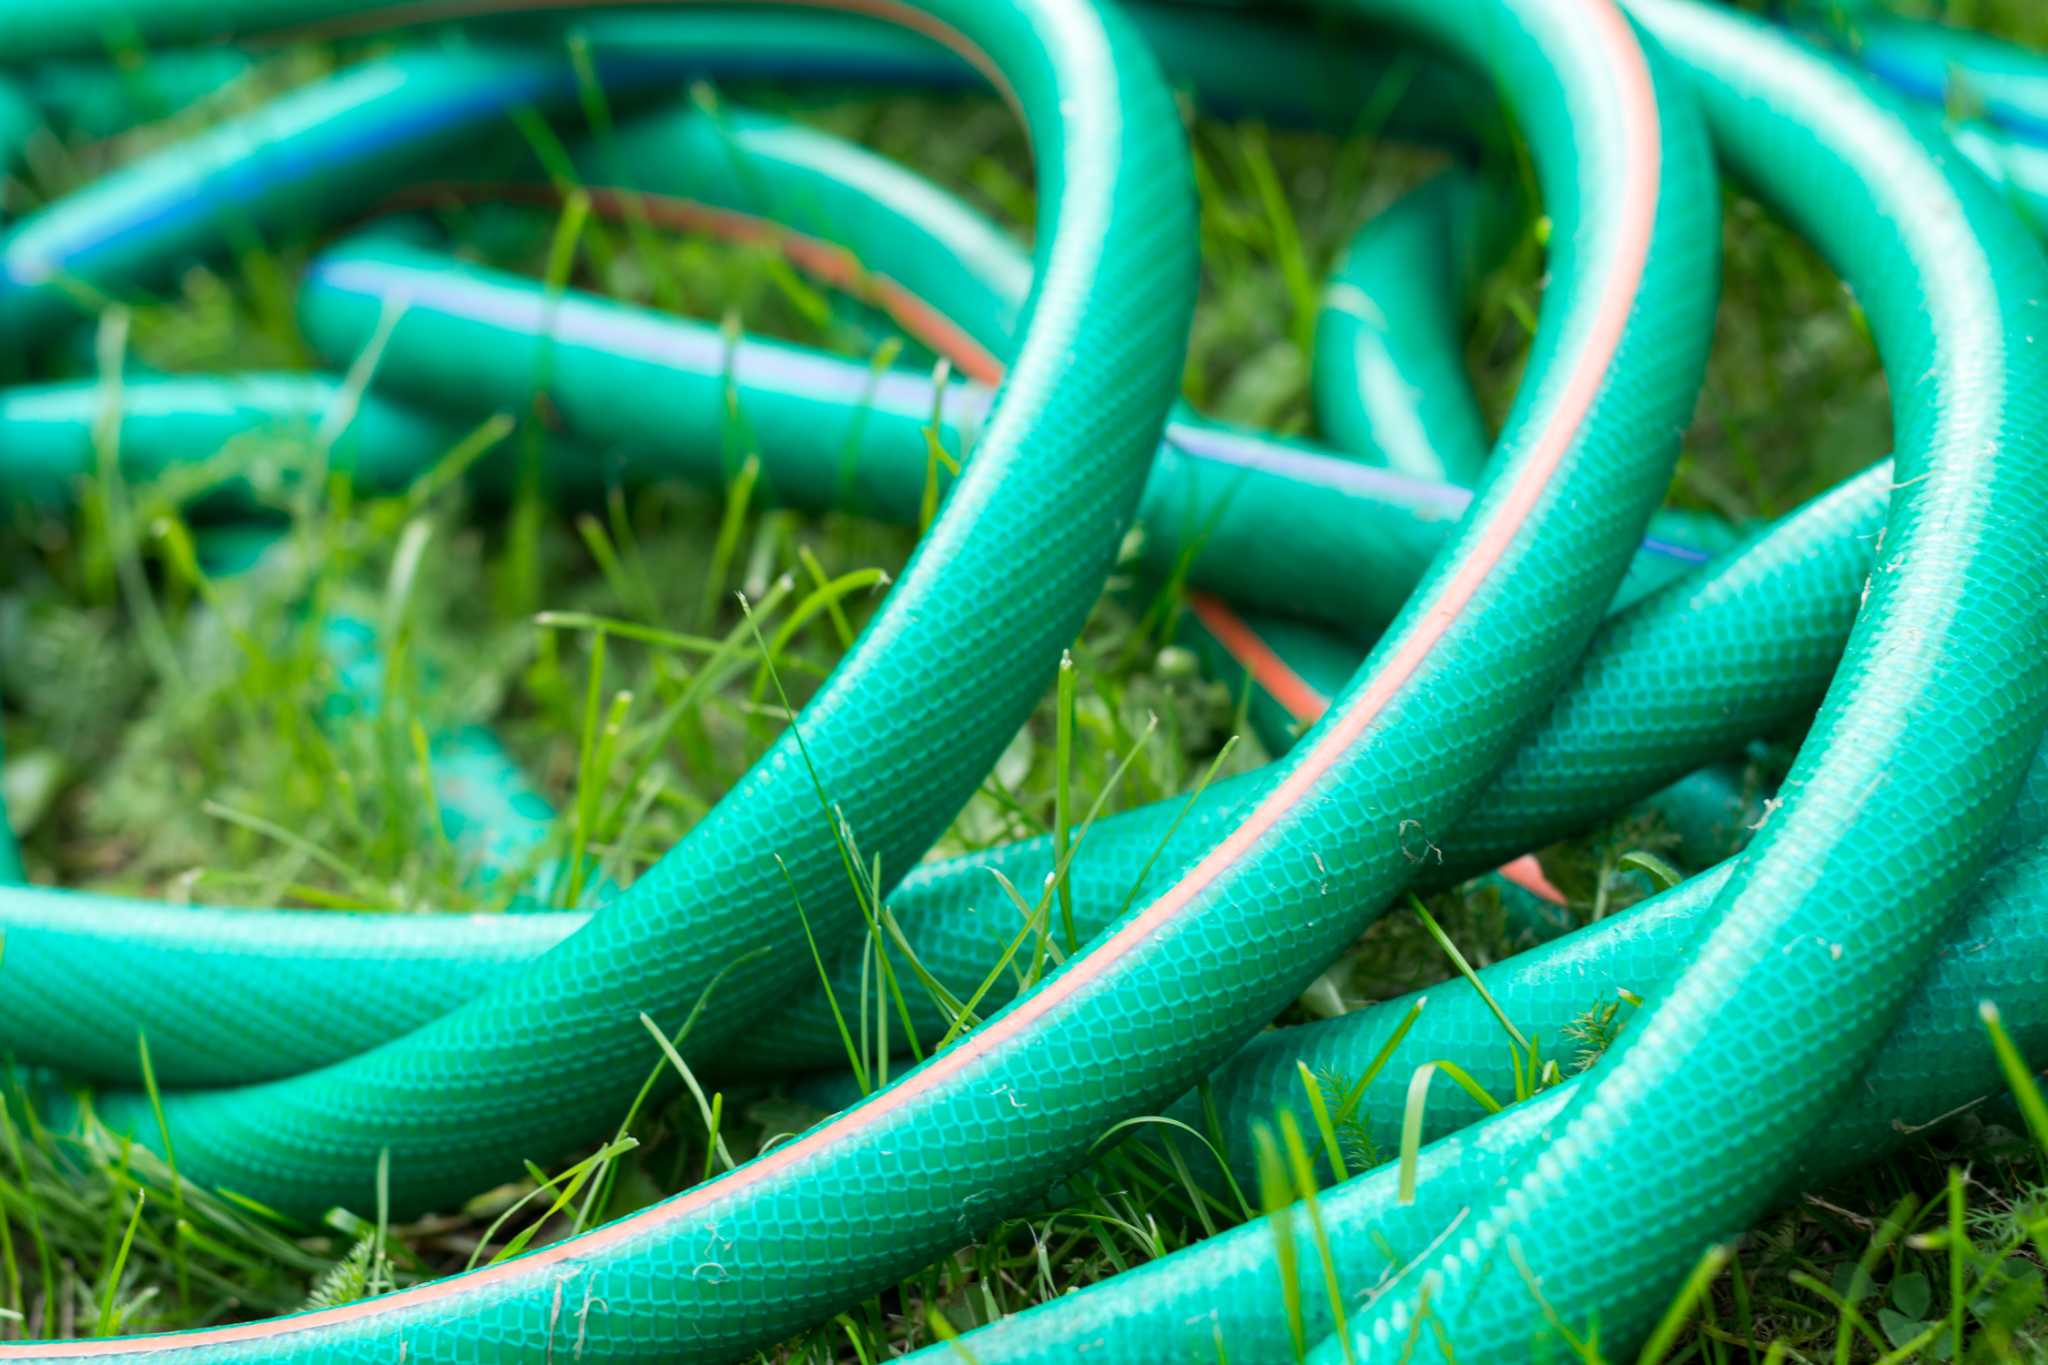 3/4-Inch vs. 5/8-Inch Garden Hose: What's the Difference?